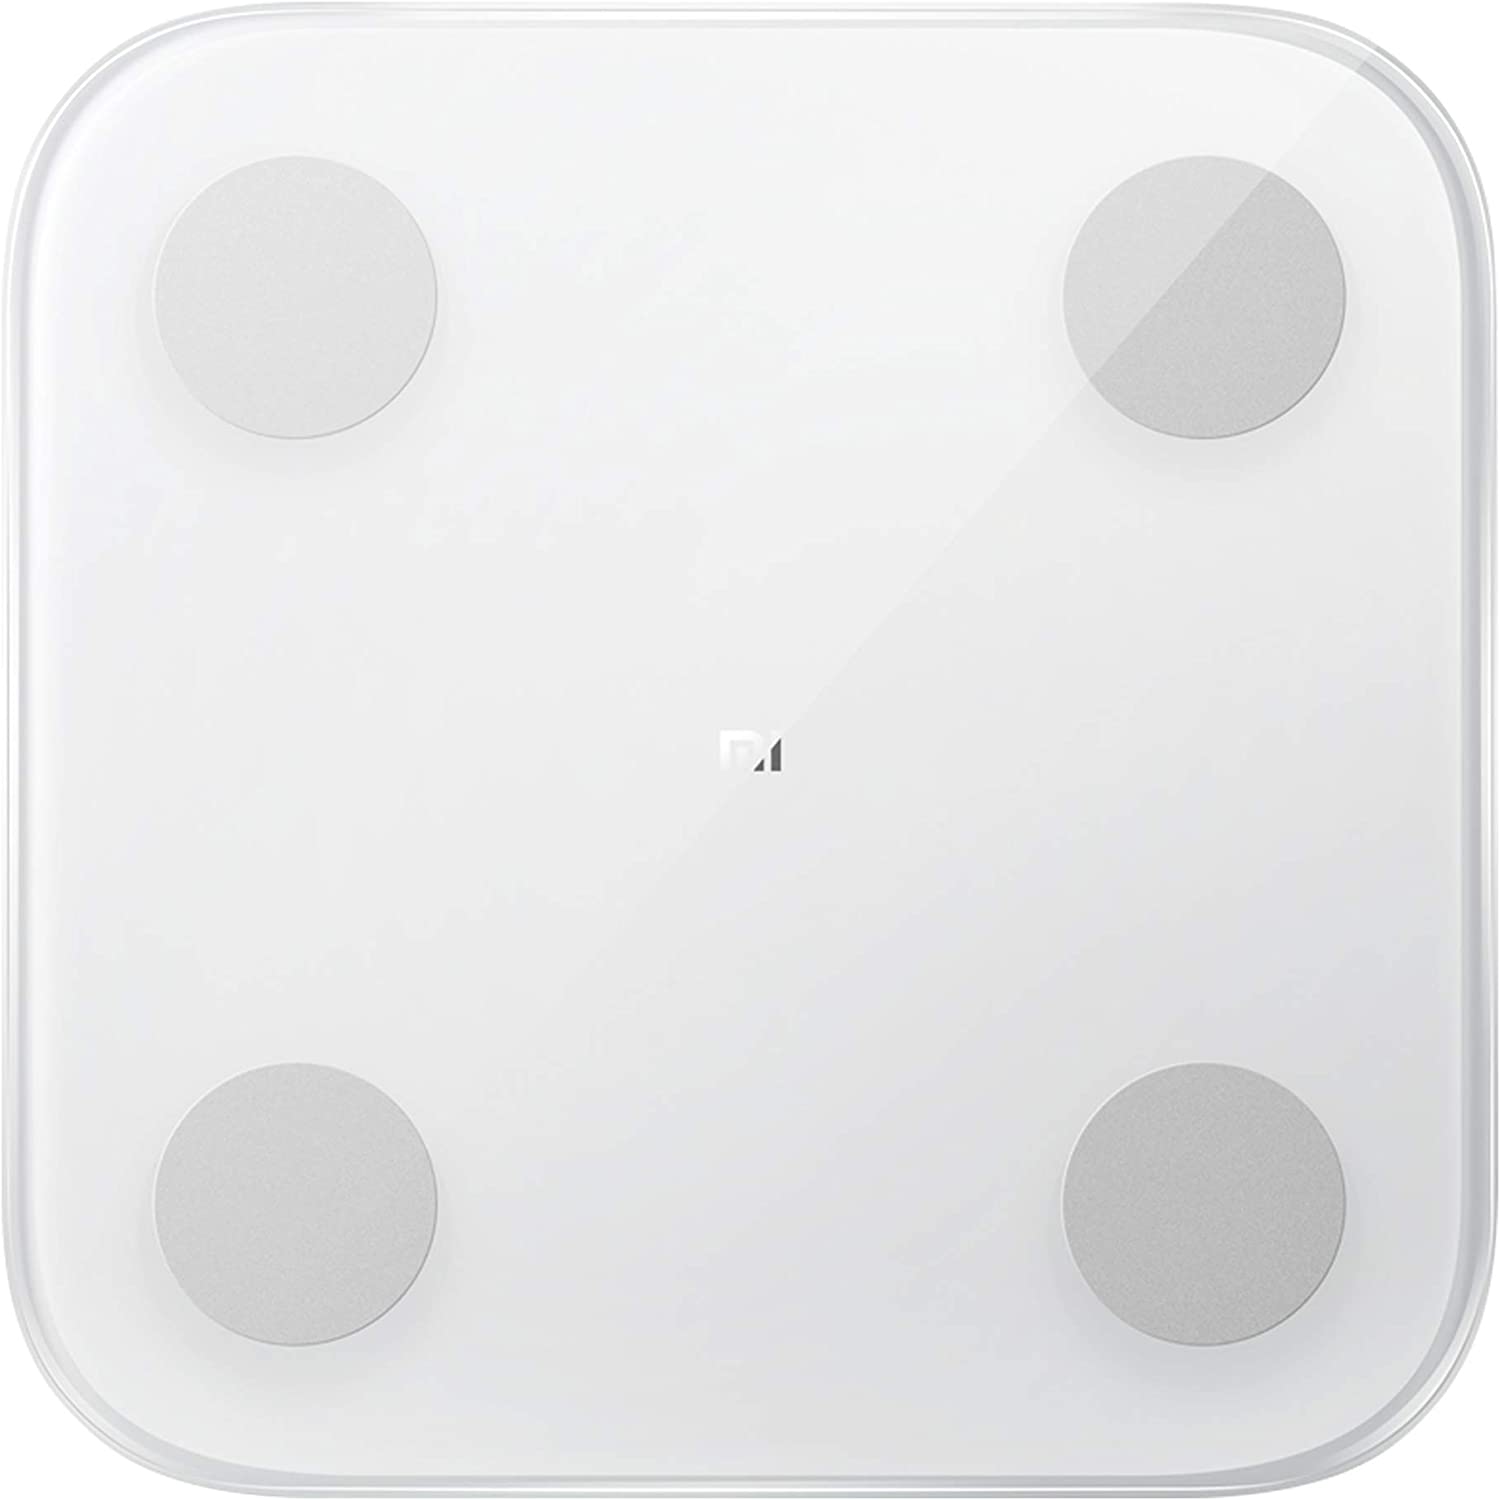 Xiaomi Weighing Body Fat Scale 2 LED Display with Smart Scale Bluetooth APP Record Track Progress, White Default Xiaomi Default 